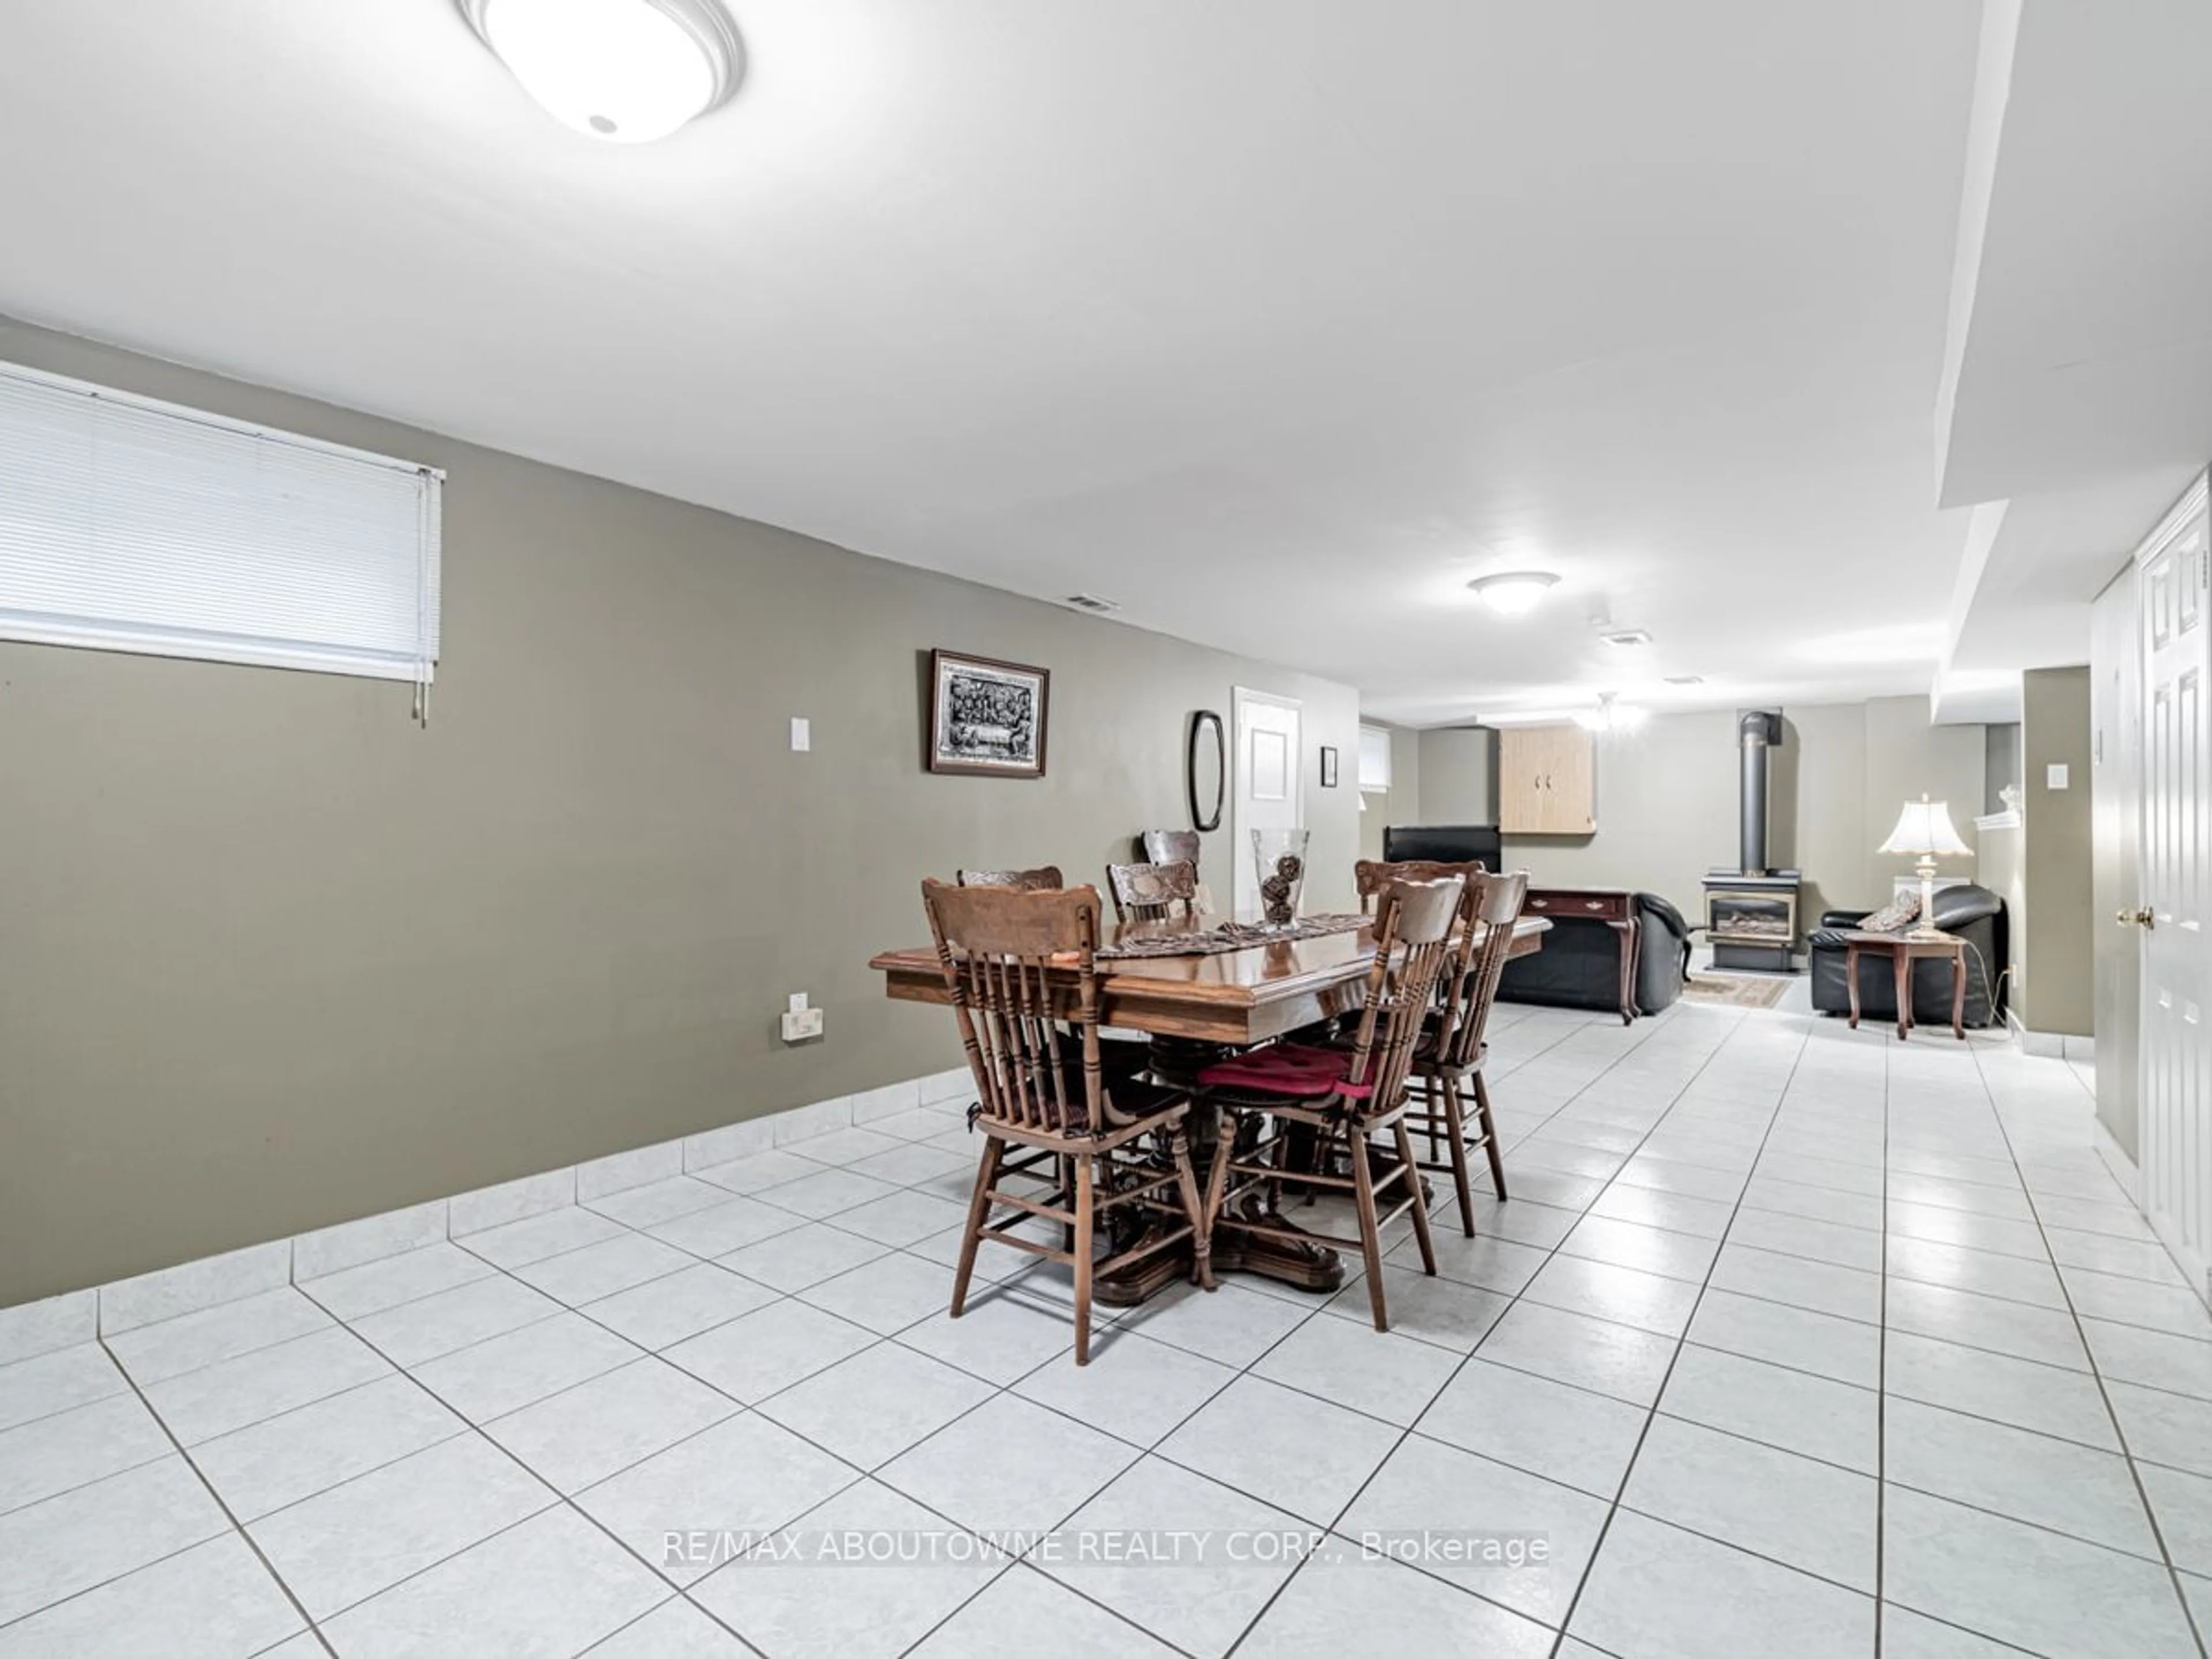 Dining room for 15 Deerhurst Ave, Toronto Ontario M9N 3A4